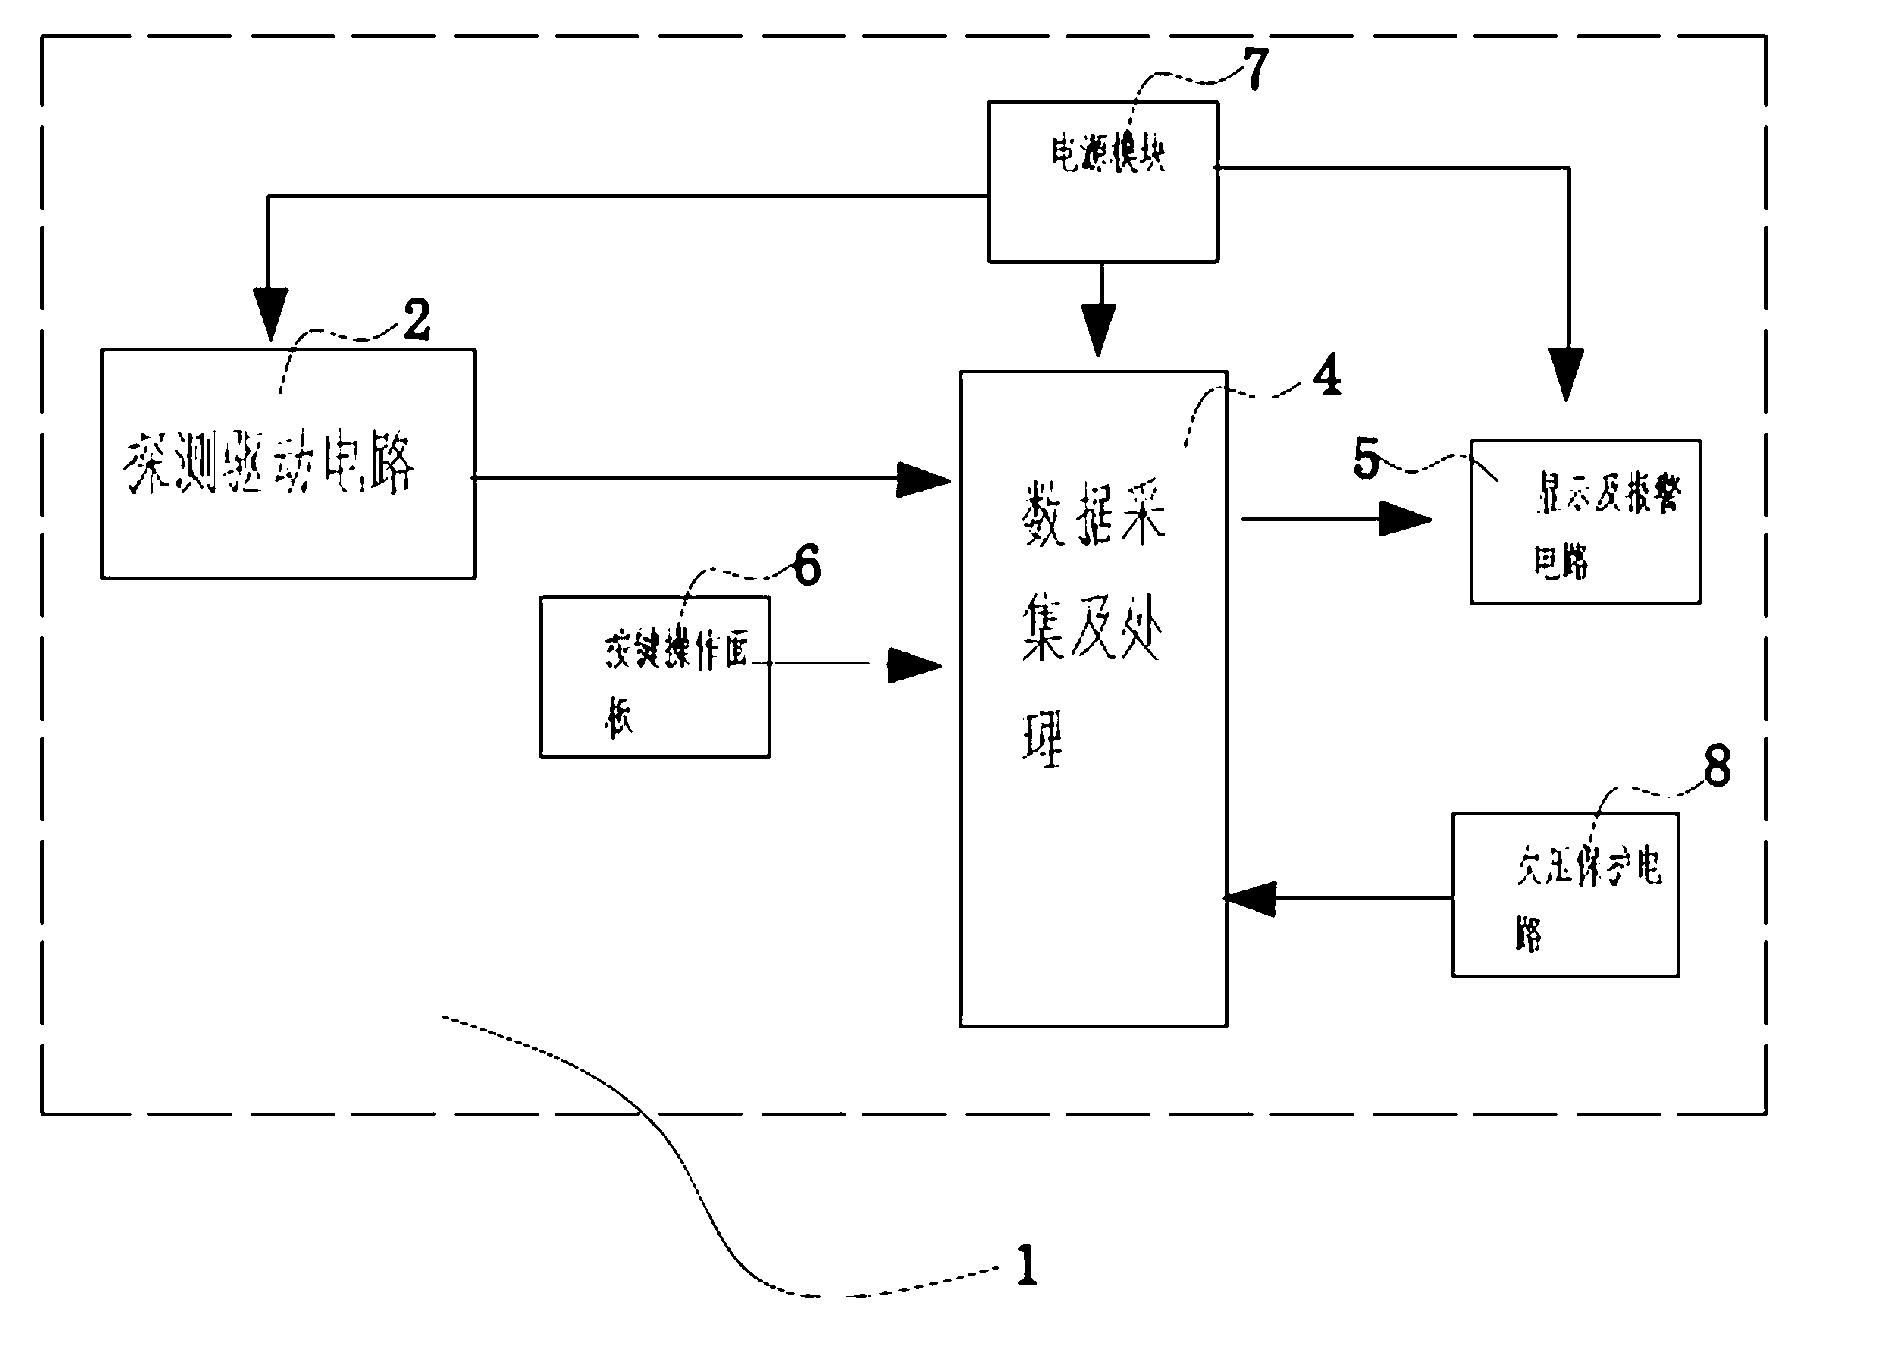 Nuclear radiation detection system